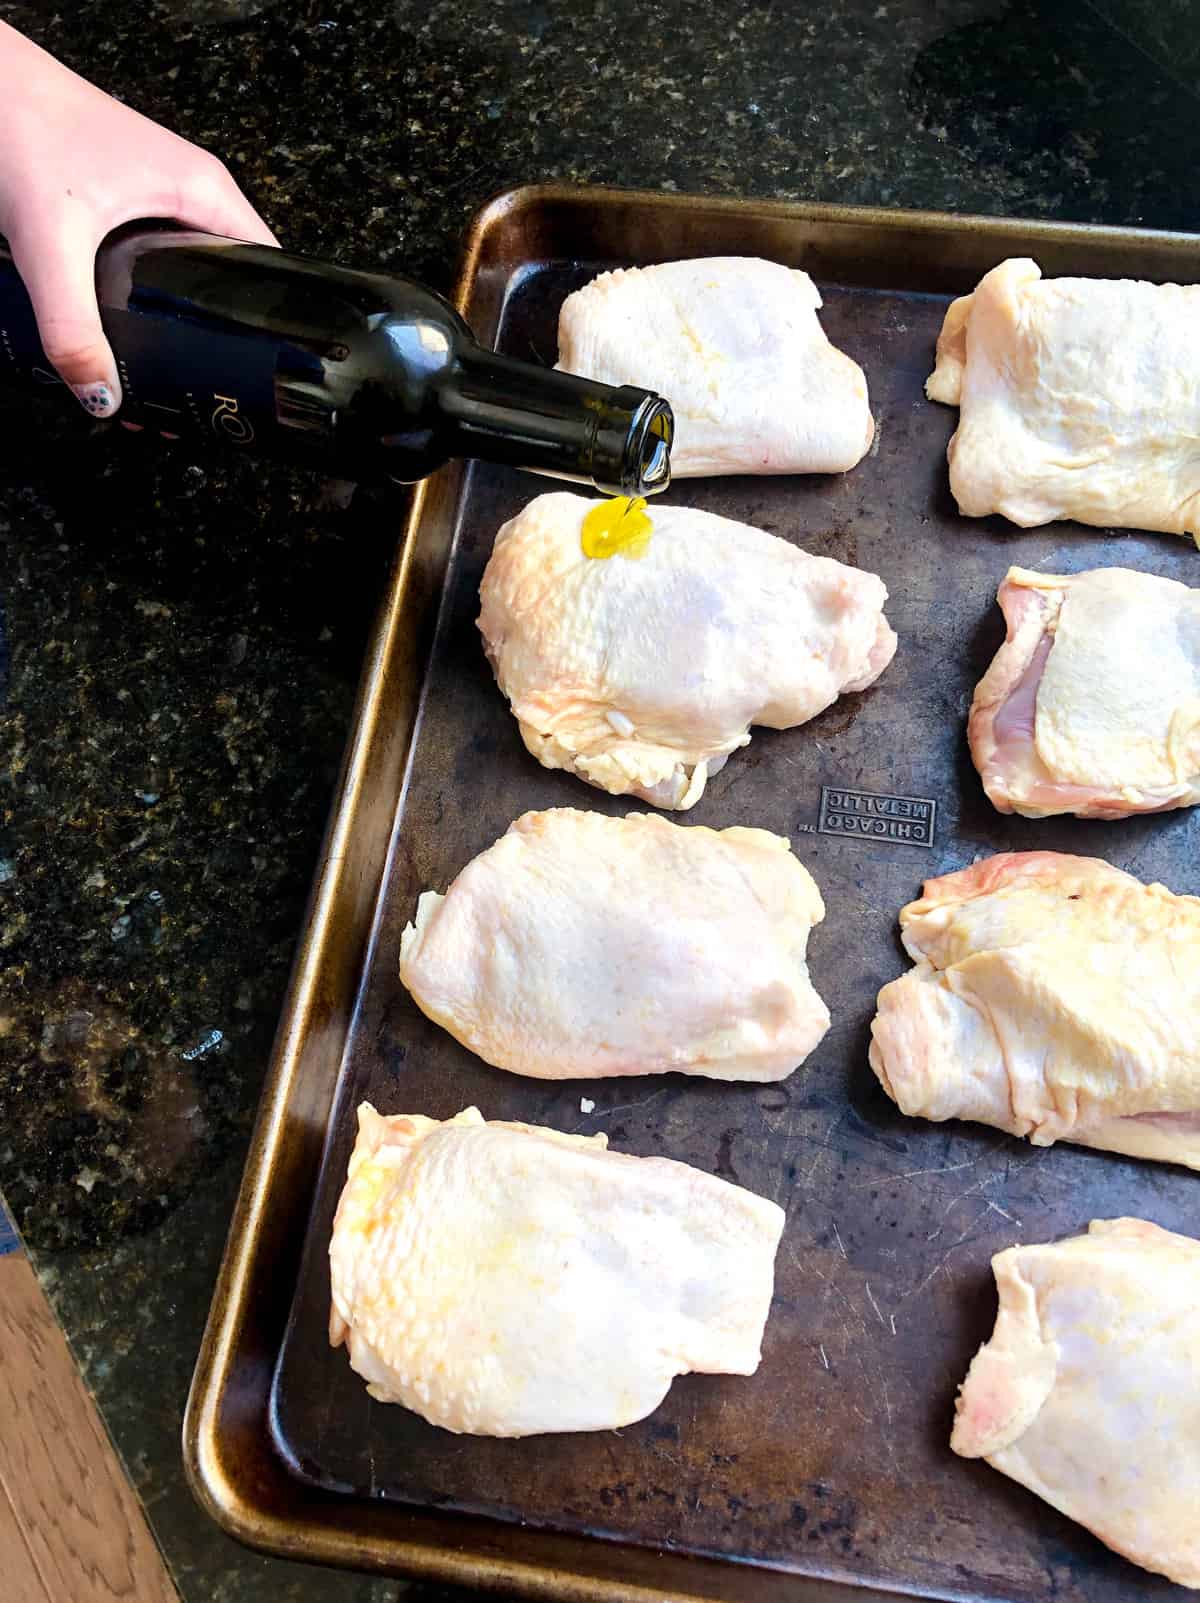 Pour olive oil over chicken